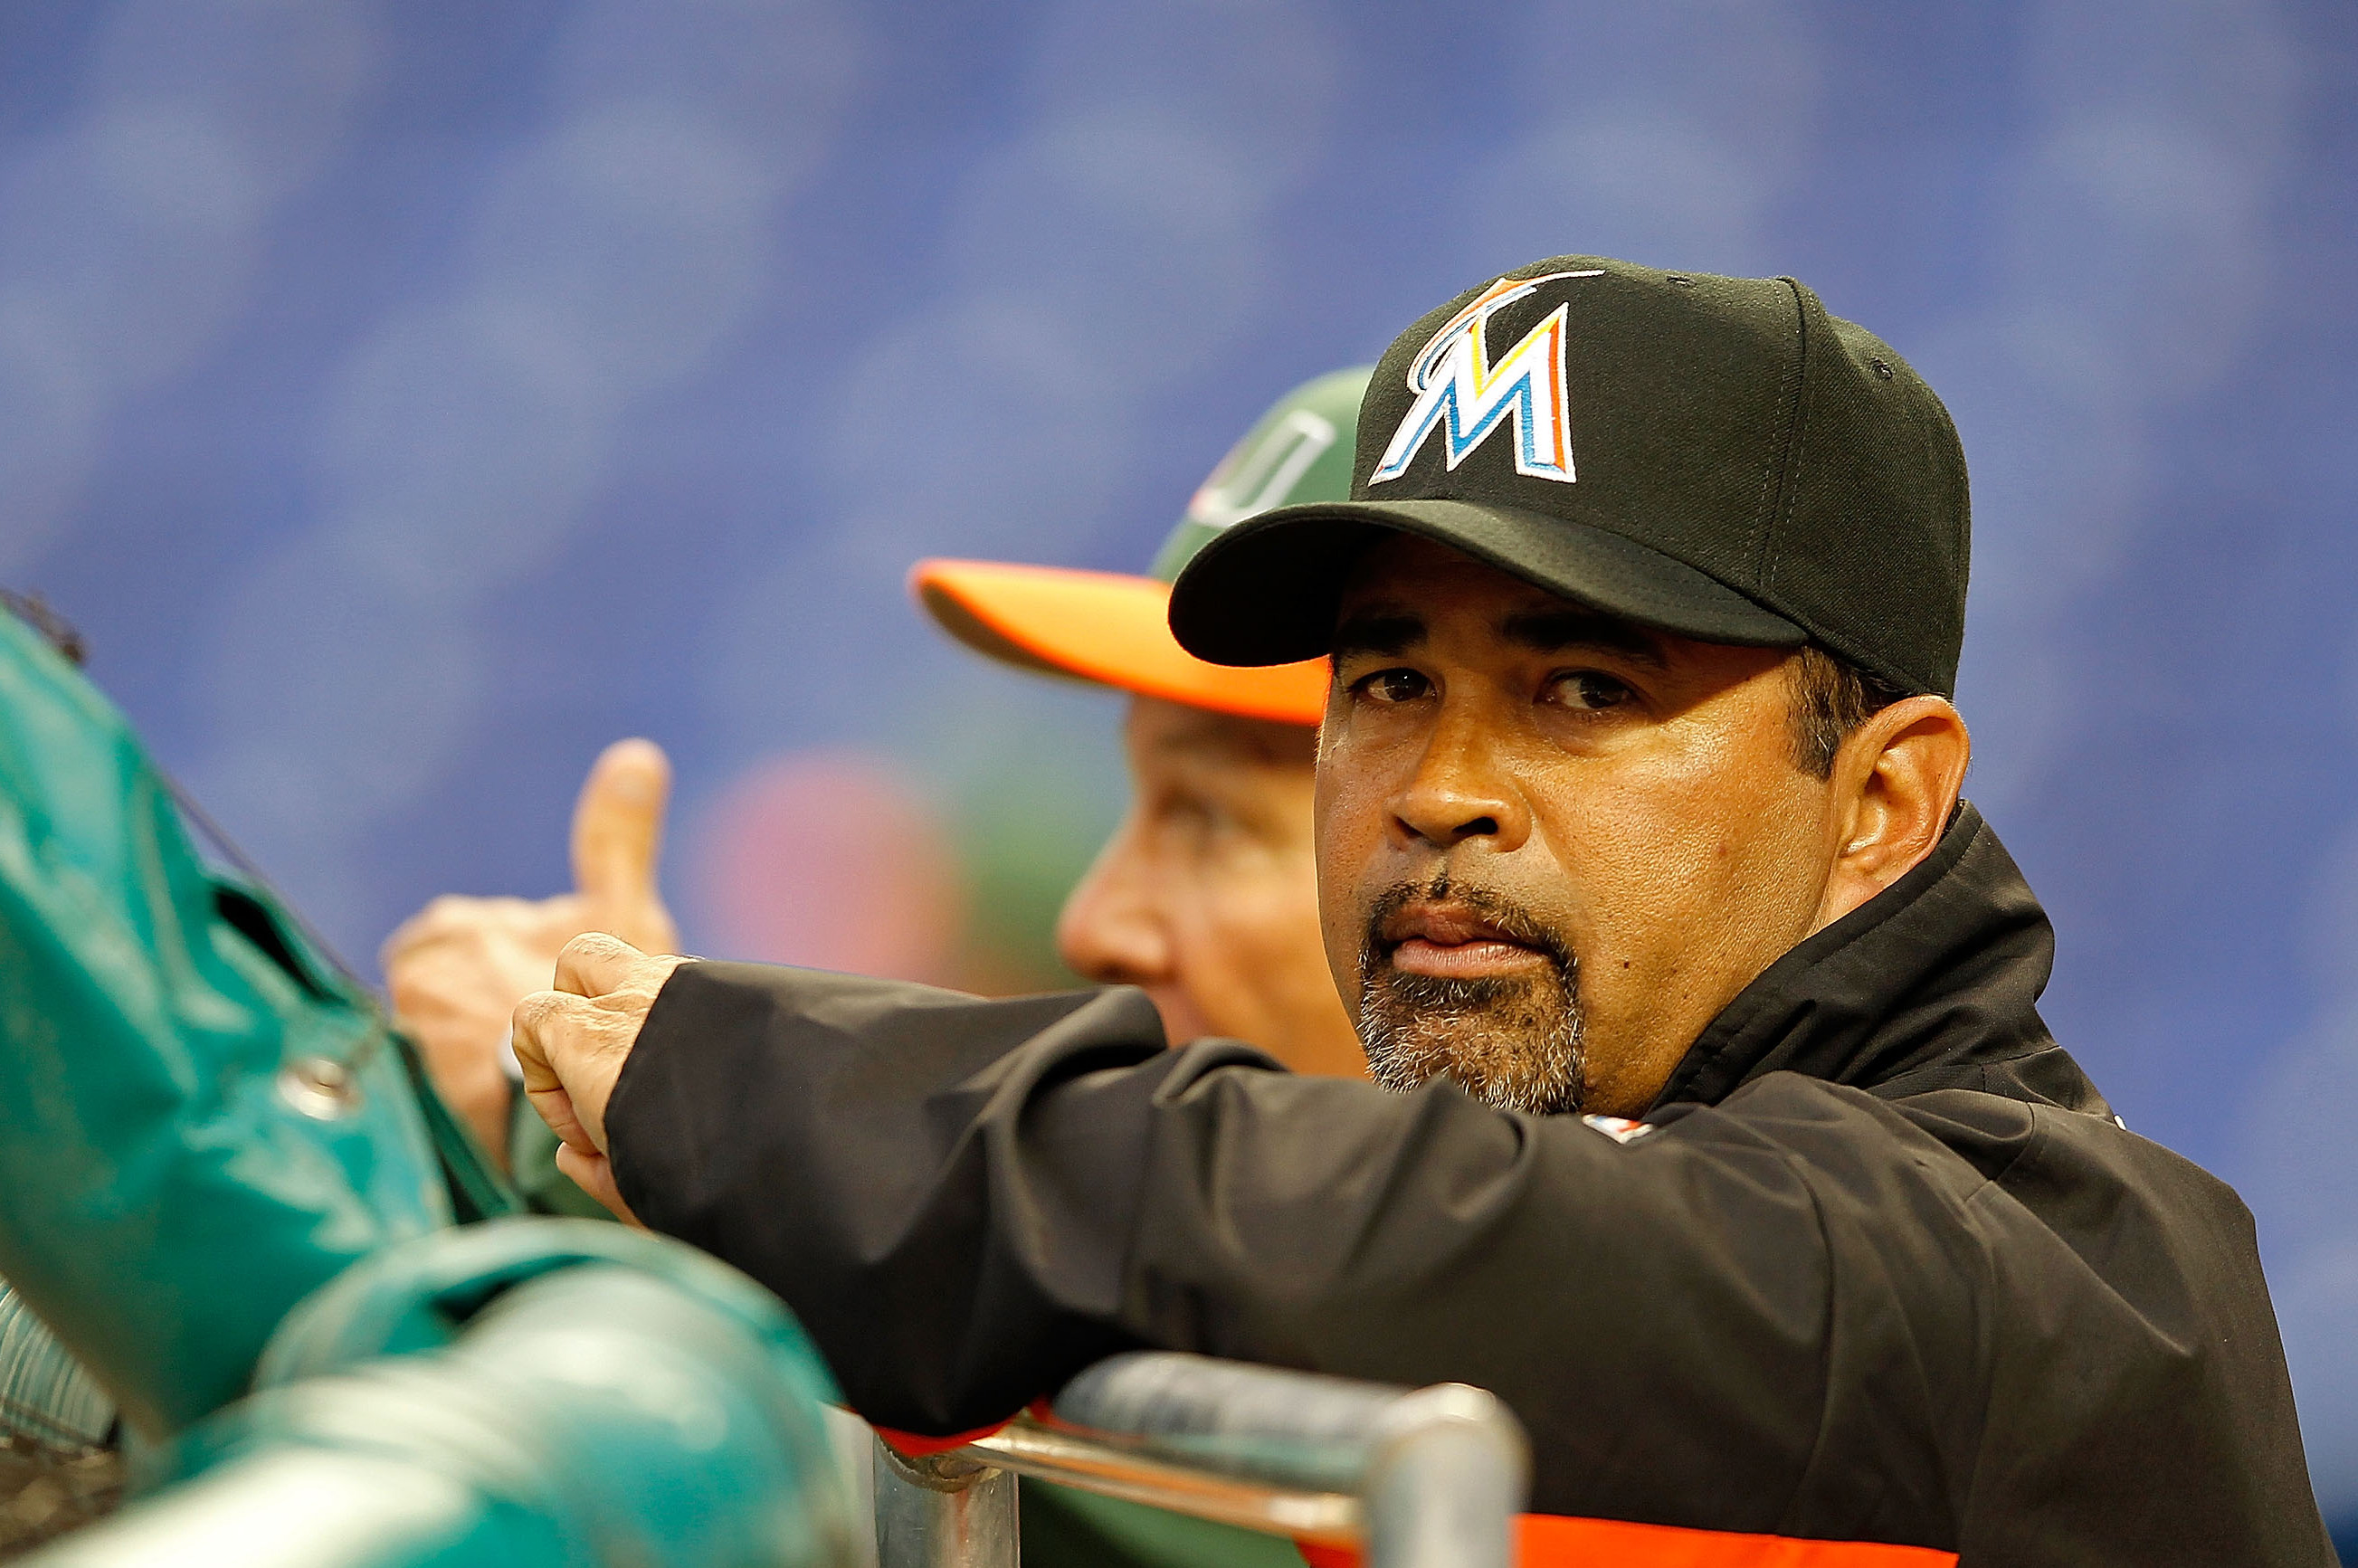 Ozzie Guillen Returns to the Dugout After Suspension - The New York Times